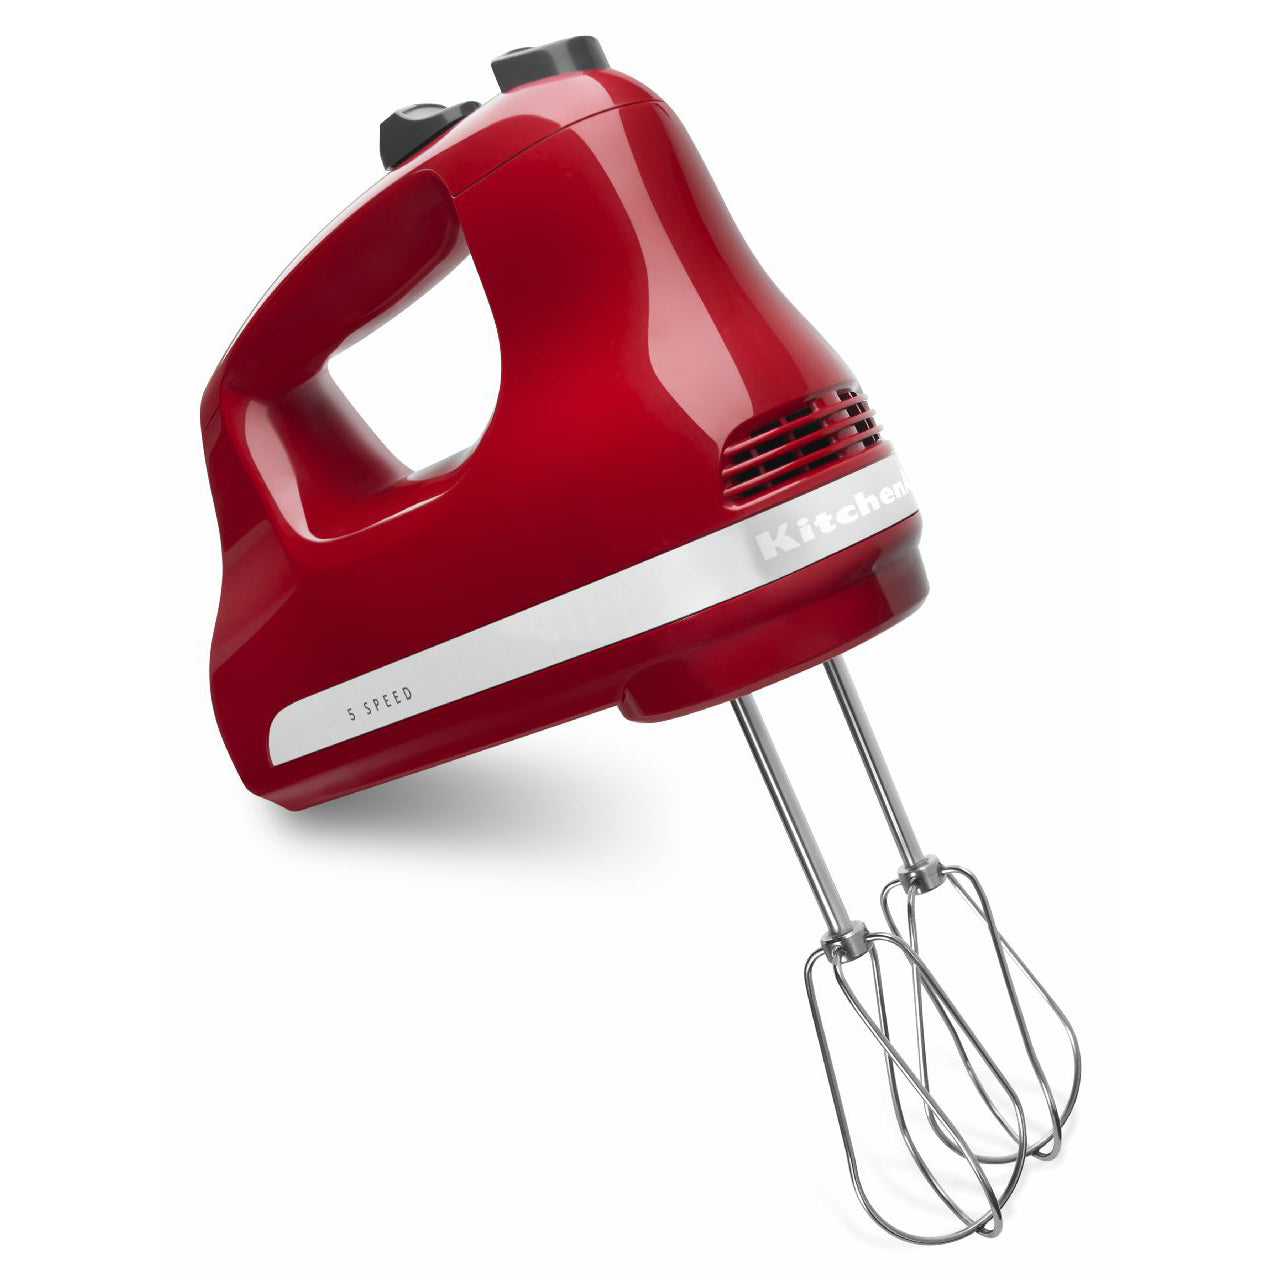 KitchenAid Gourmet Cookie Press with 12 Cookie Discs with Gabrielle Kerr 